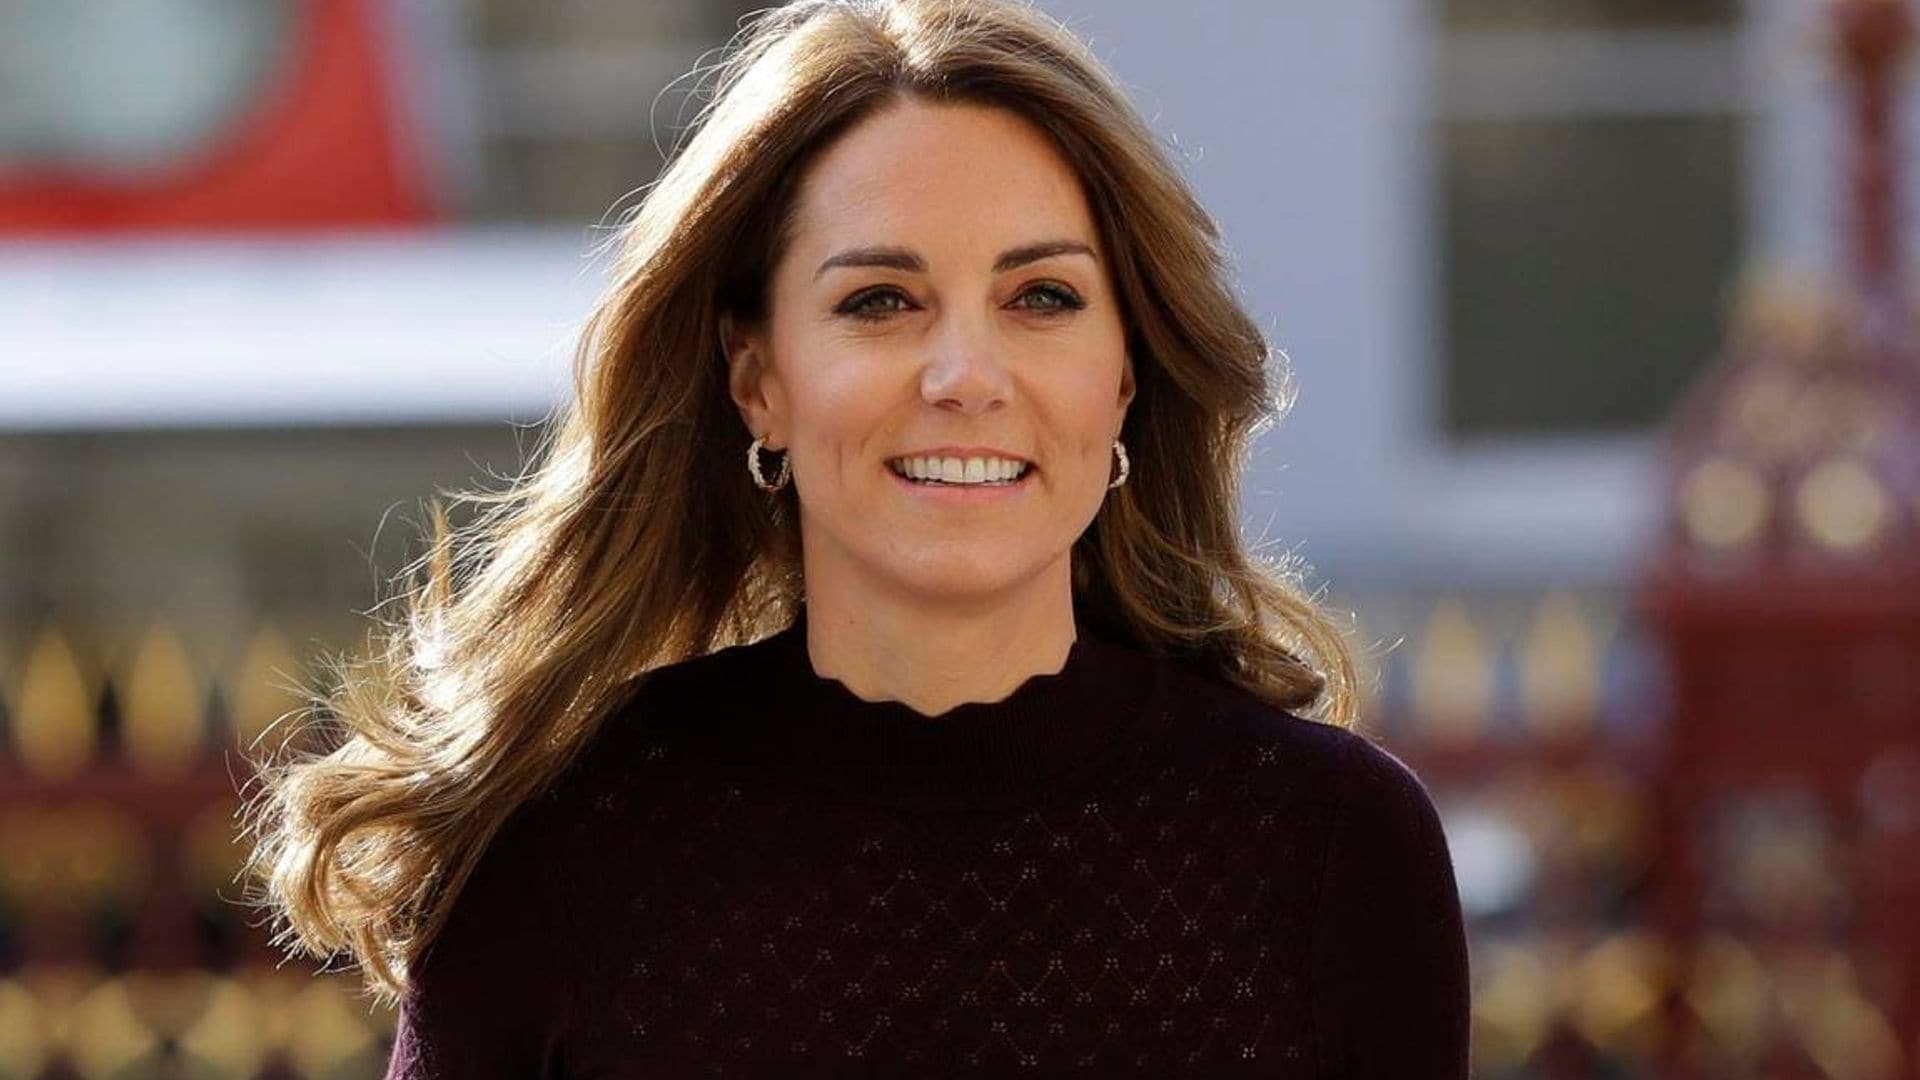 Kate Middleton rocks the perfect plum accessory and you can too for a fraction of the cost